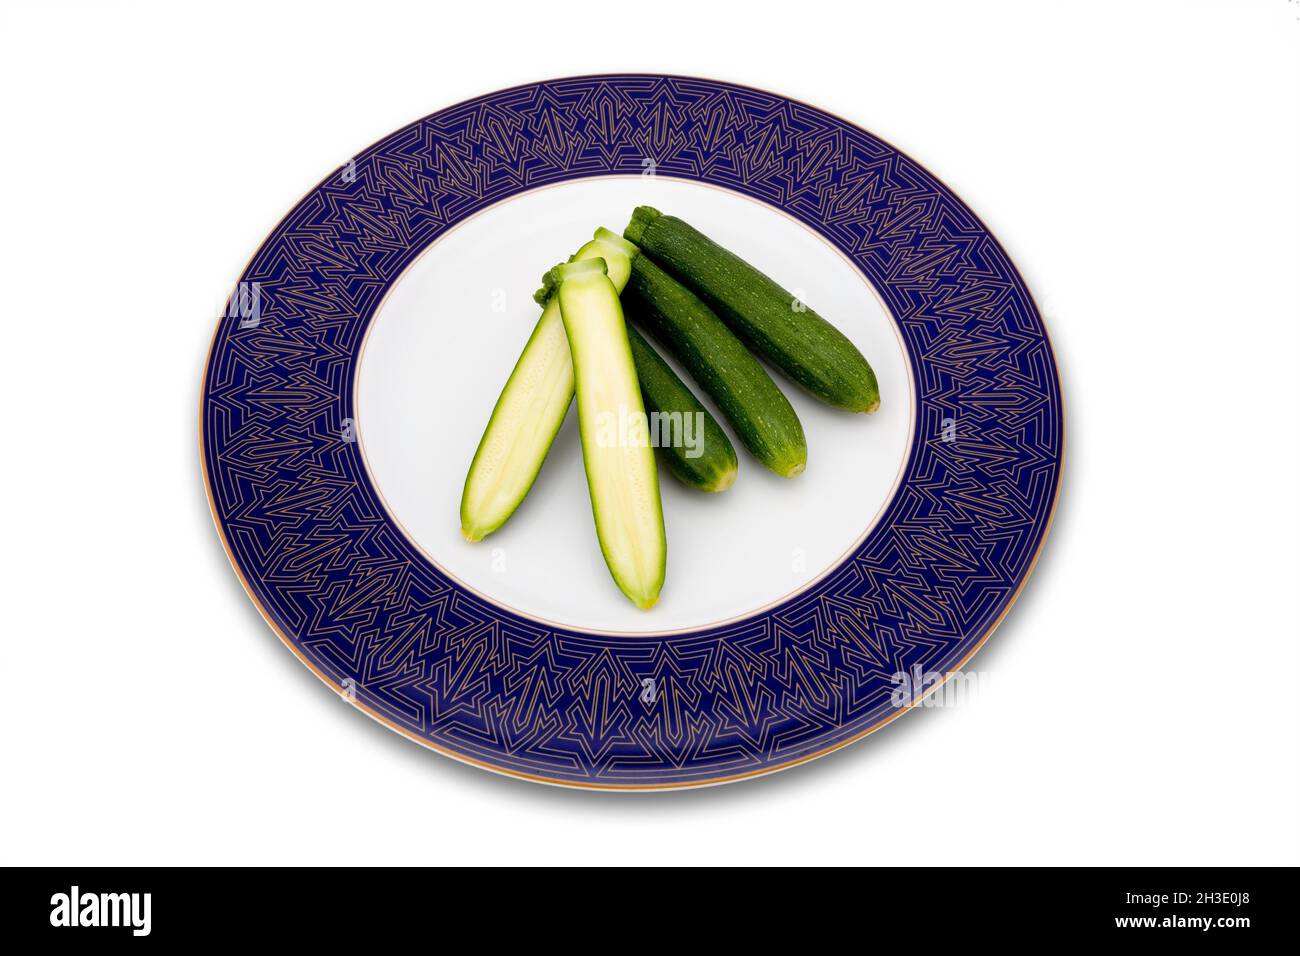 courgette, zucchini (Cucurbita pepo var. giromontiia, Cucurbita pepo subsp. pepo convar. giromontiina), courgettes on a plate, one of them halved Stock Photo